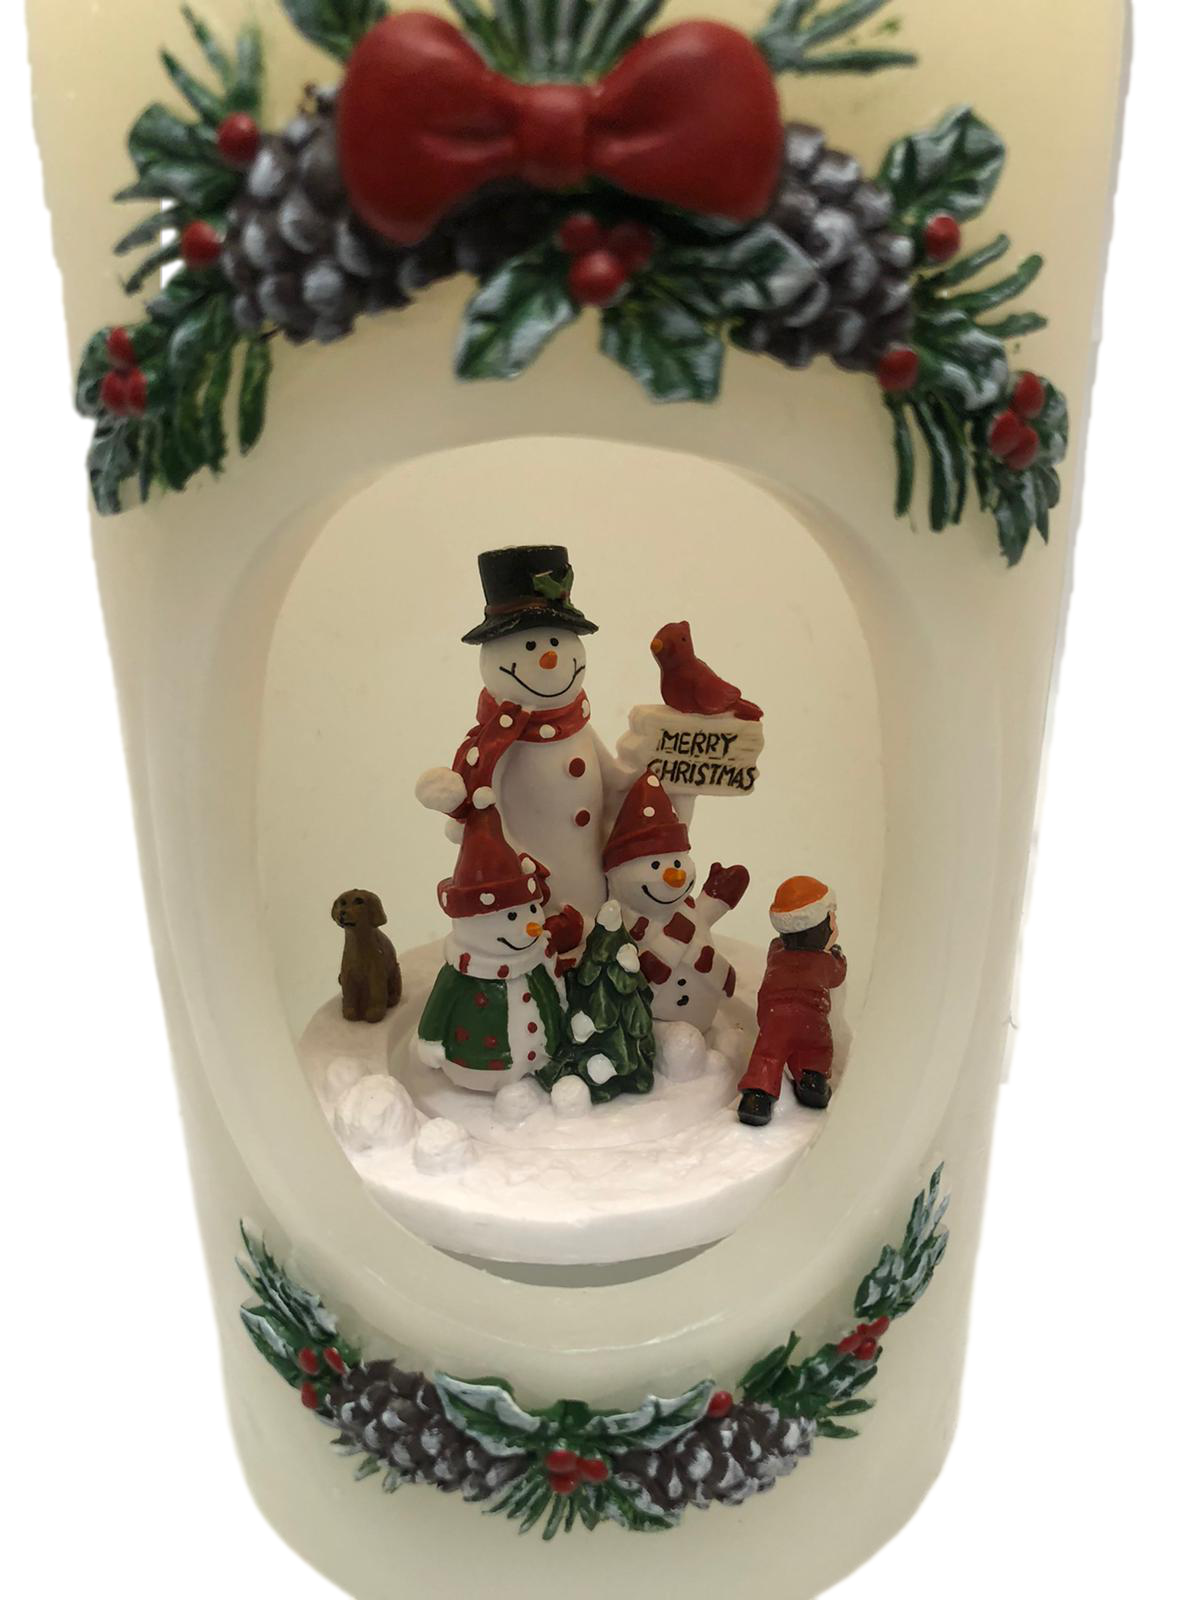 7" Illuminated Pillar with Rotating Scene and Gift Box by Valerie